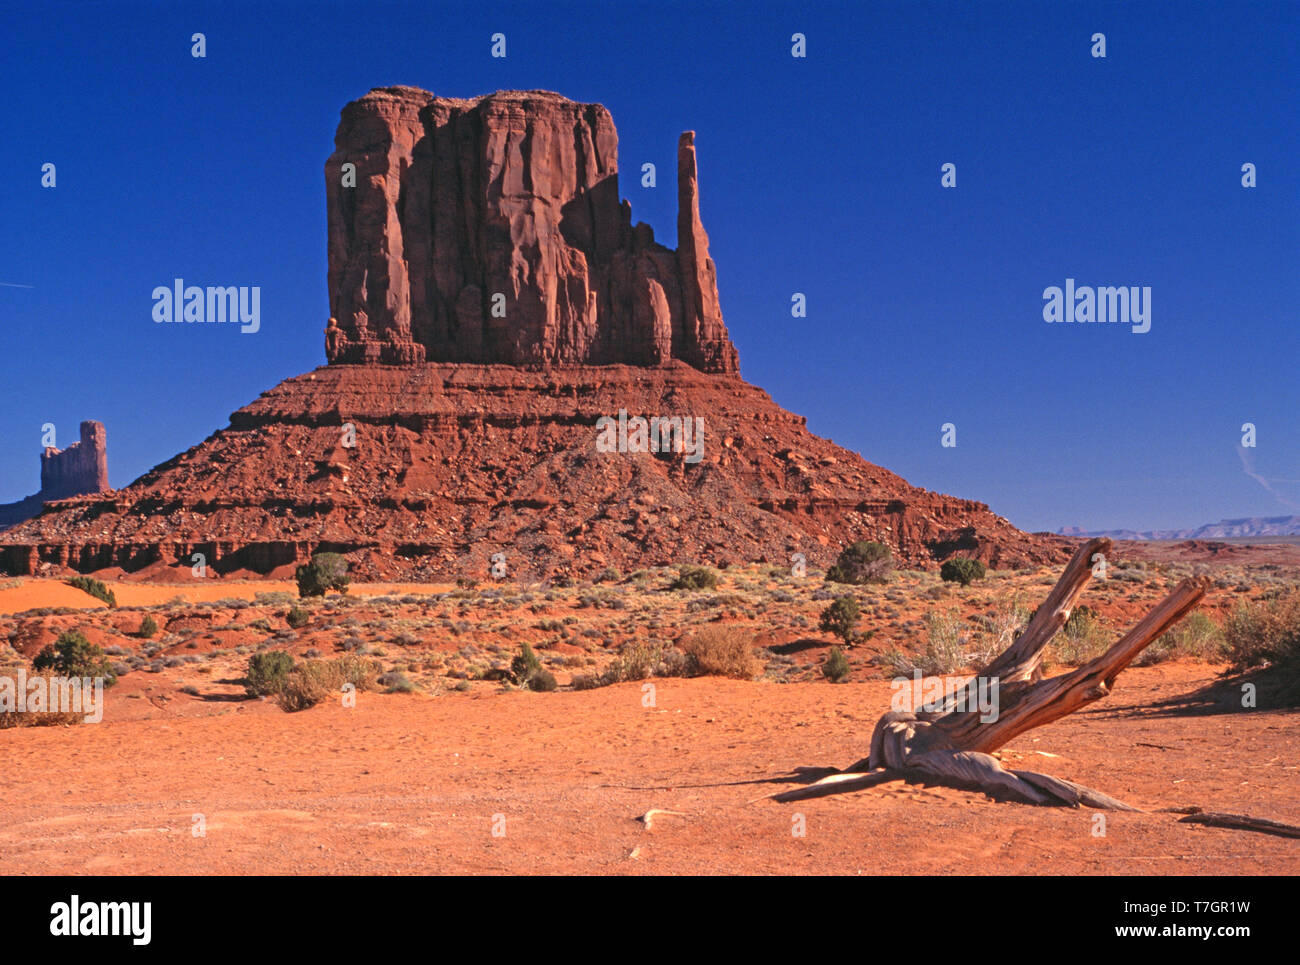 USA. Arizona. Monument Valley. Landscape with West Mitten Butte rock formation. Stock Photo